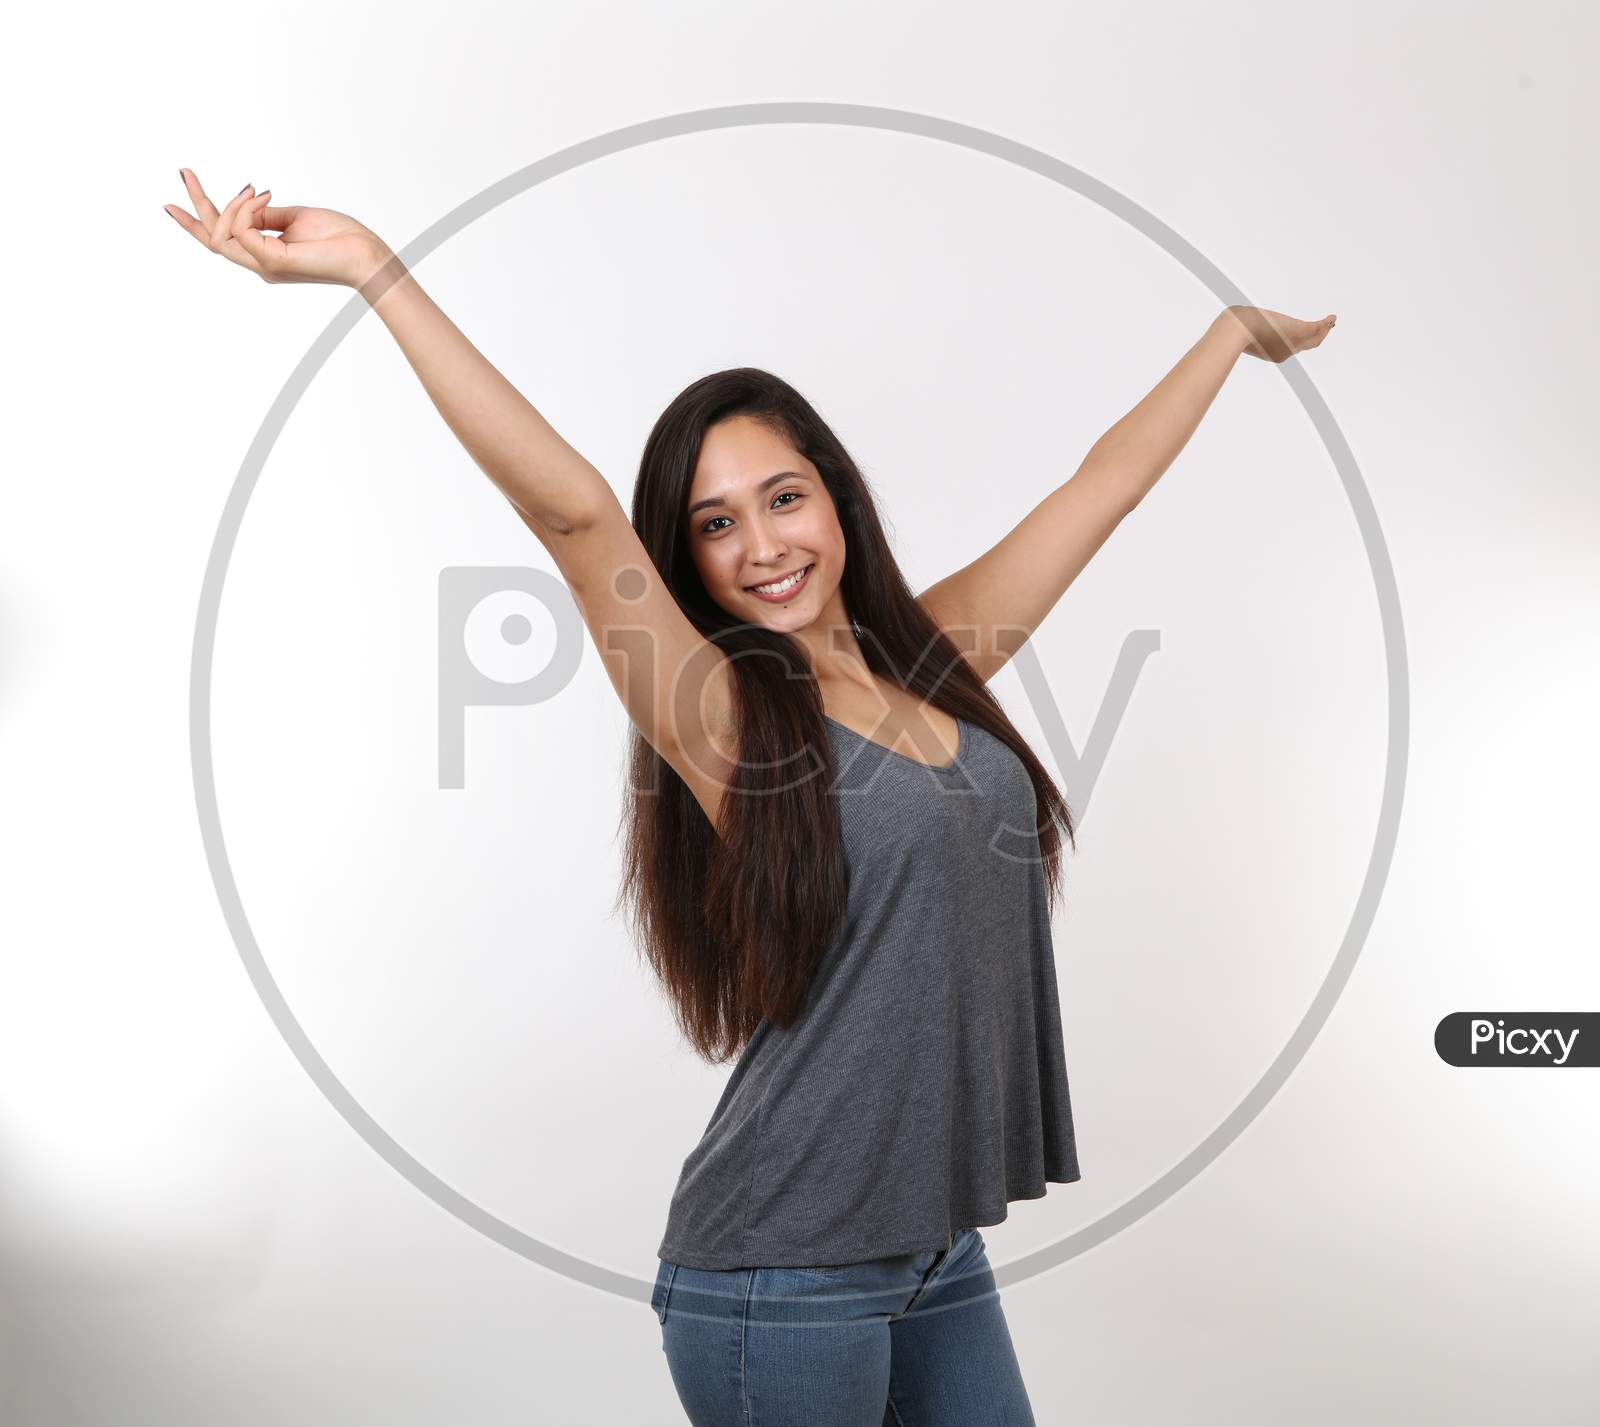 An Excited Hispanic Young Girl Throws Her Hands In The Air With Excitement.